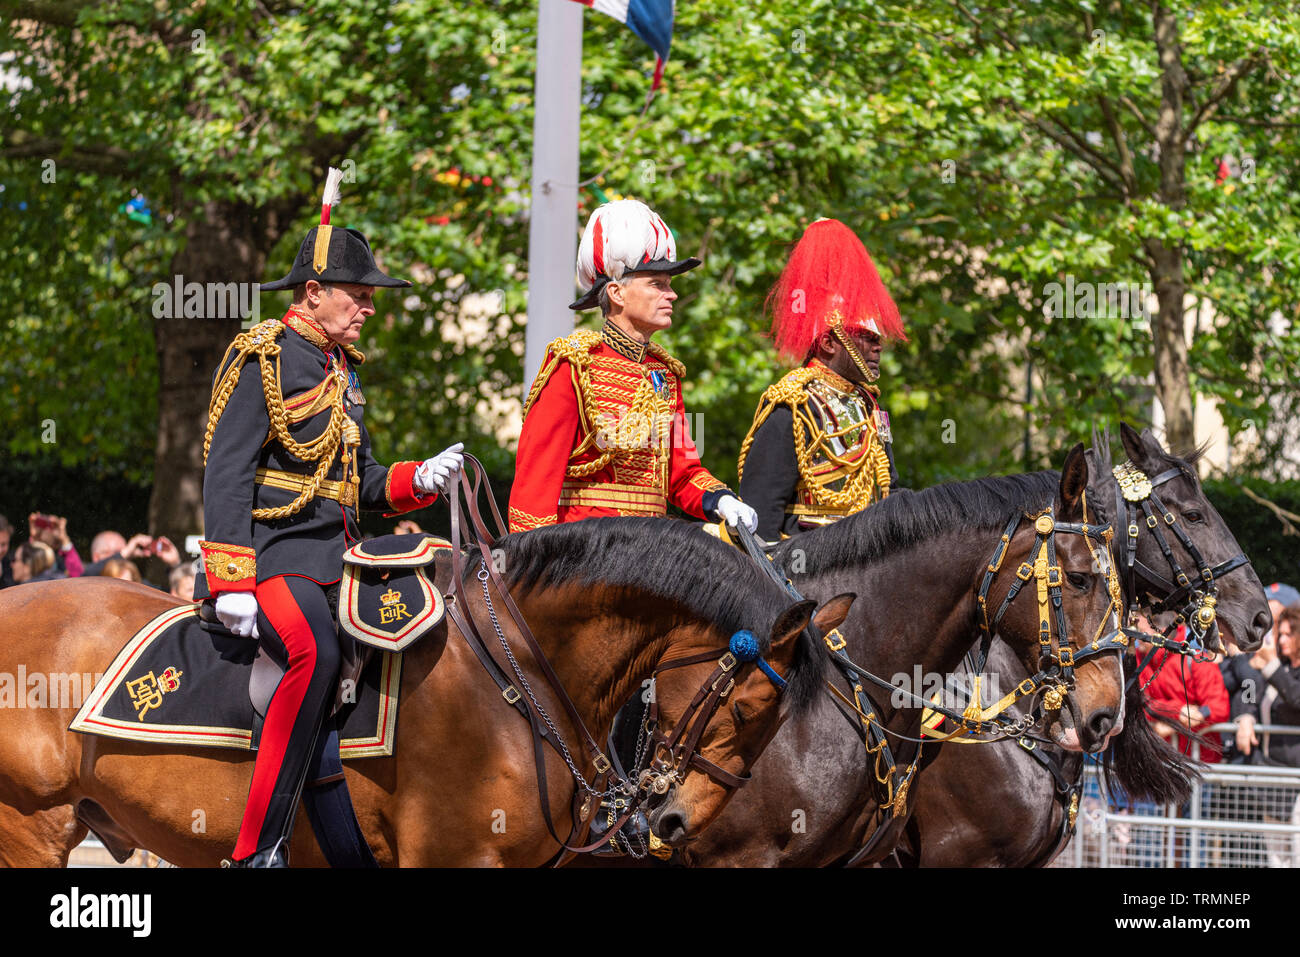 Ceremonial dress uniforms of officers of British Army Household Cavalry mounted soldiers at Trooping the Colour 2019, London, UK. Plumage Stock Photo